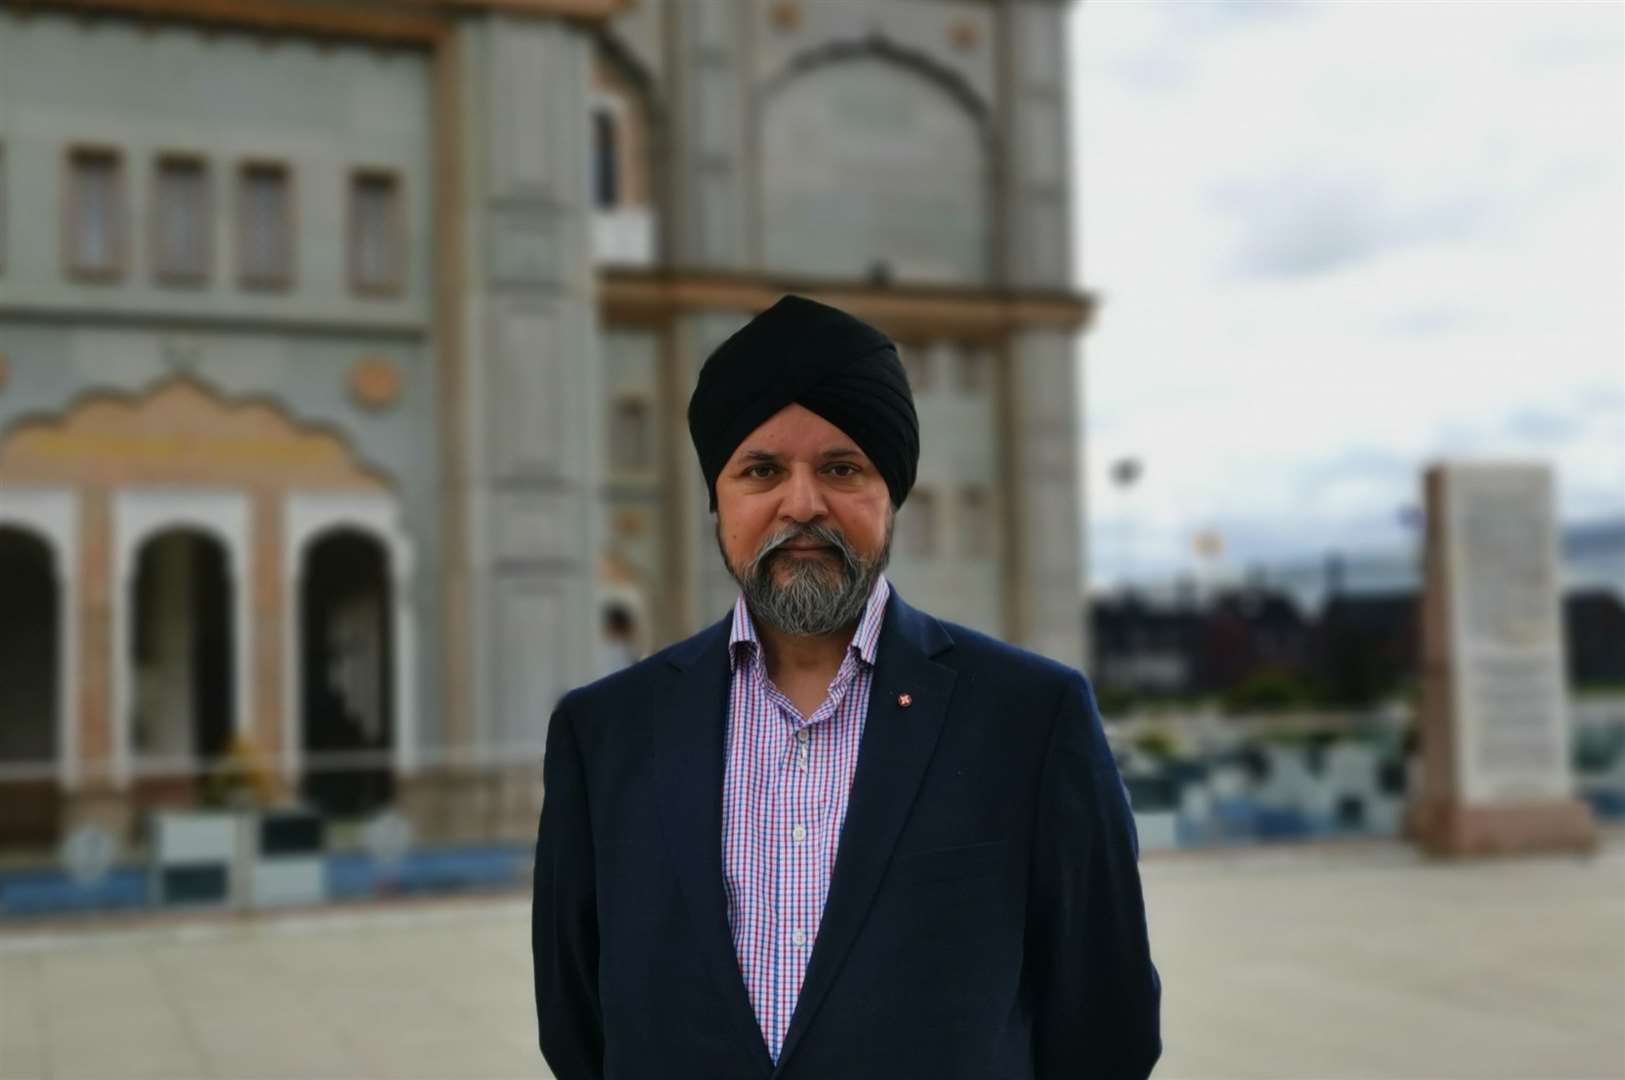 Jagdev Singh Virdee, general secretary at the Gurdwara in Gravesend, says they have contacted police about the scam